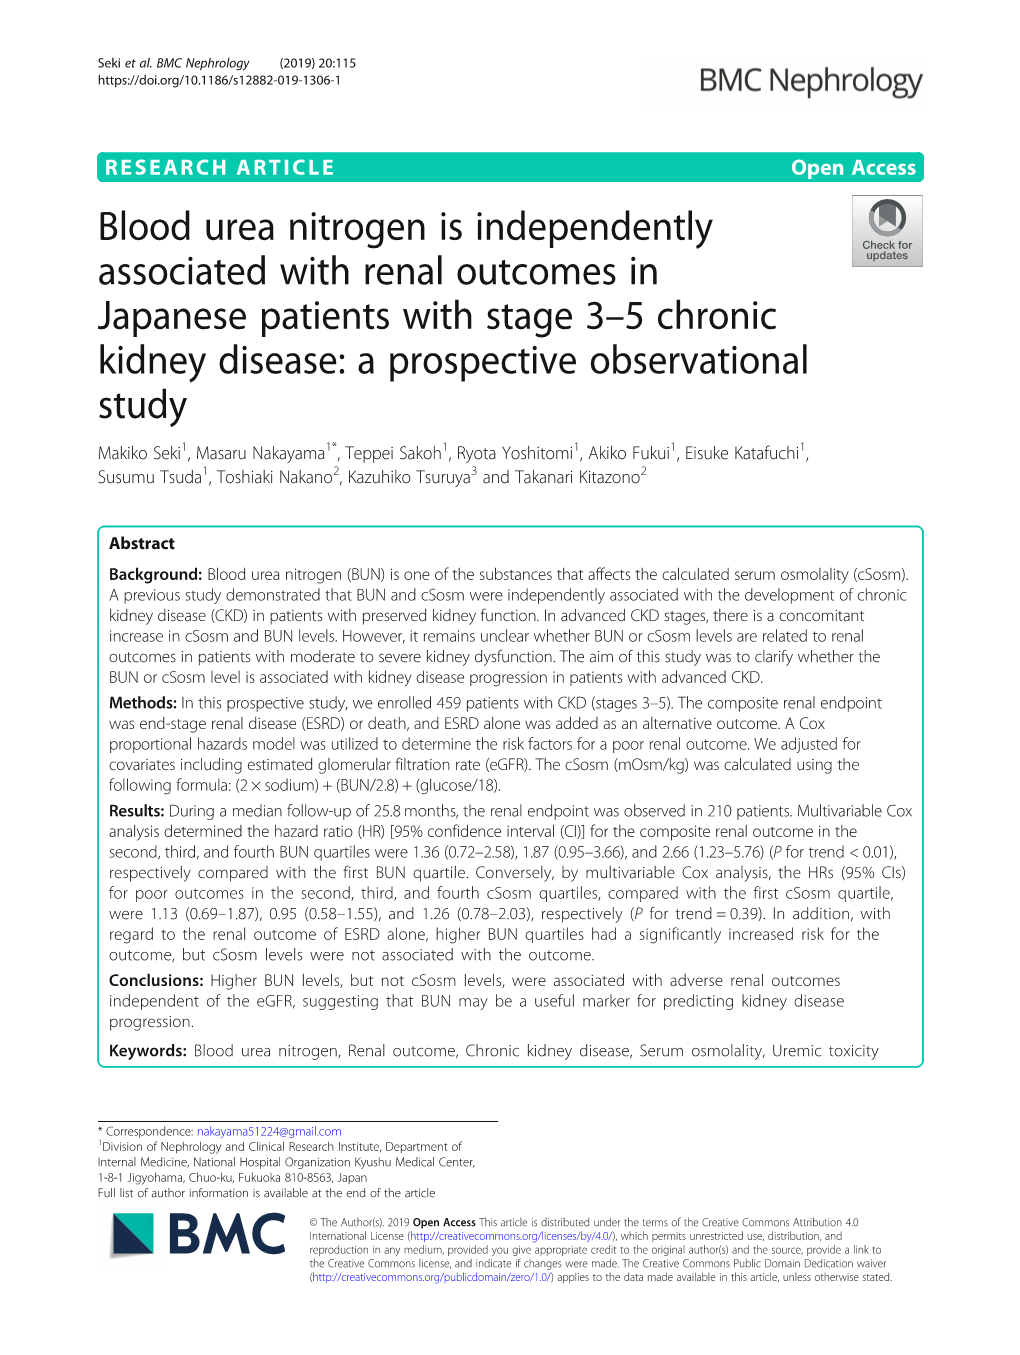 Blood Urea Nitrogen Is Independently Associated with Renal Outcomes In